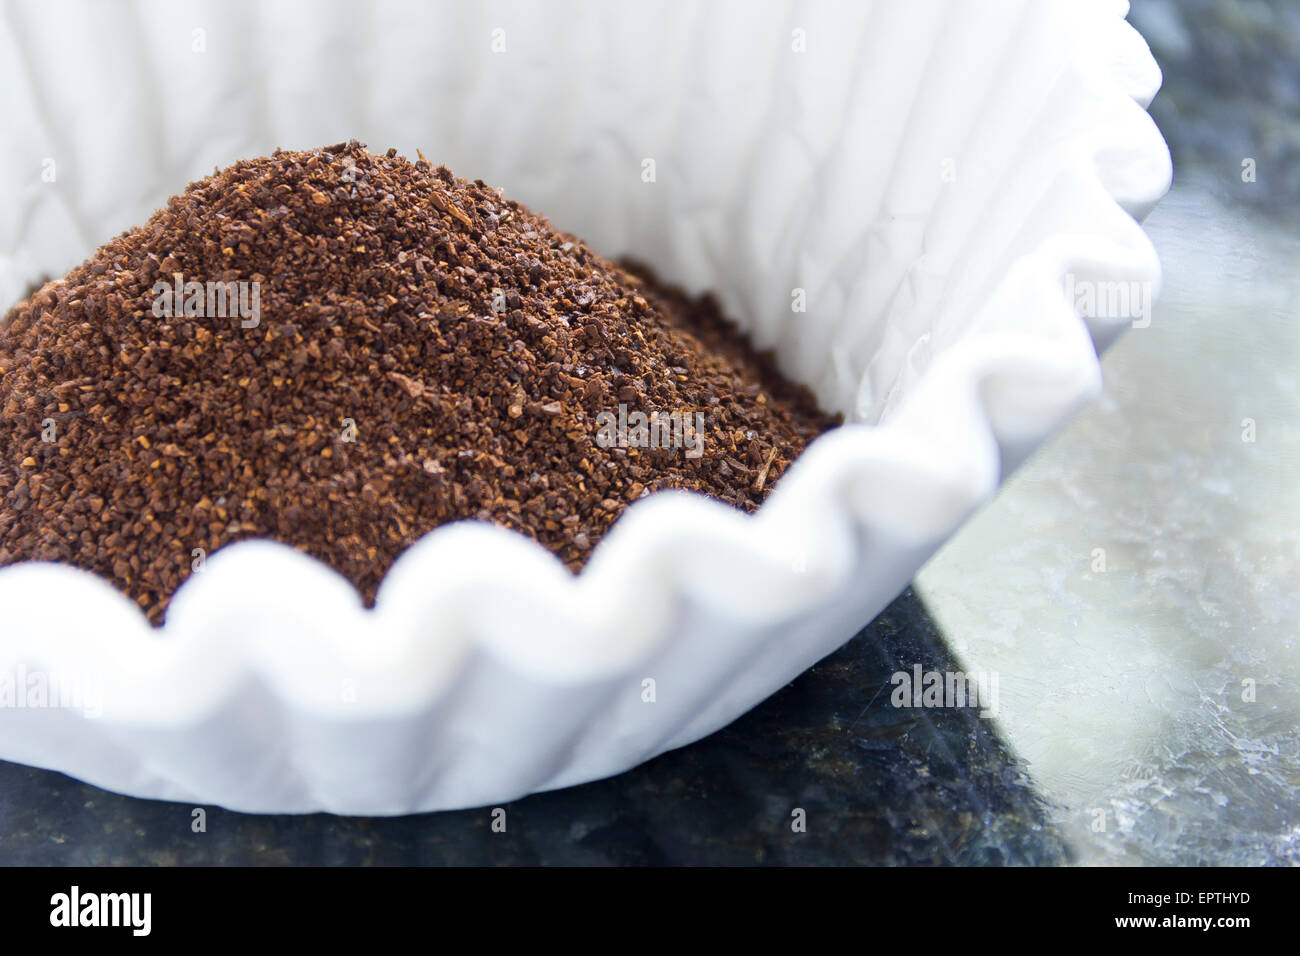 Fresh coffee grounds ready to be brewed for morning jolt of caffeine Stock Photo